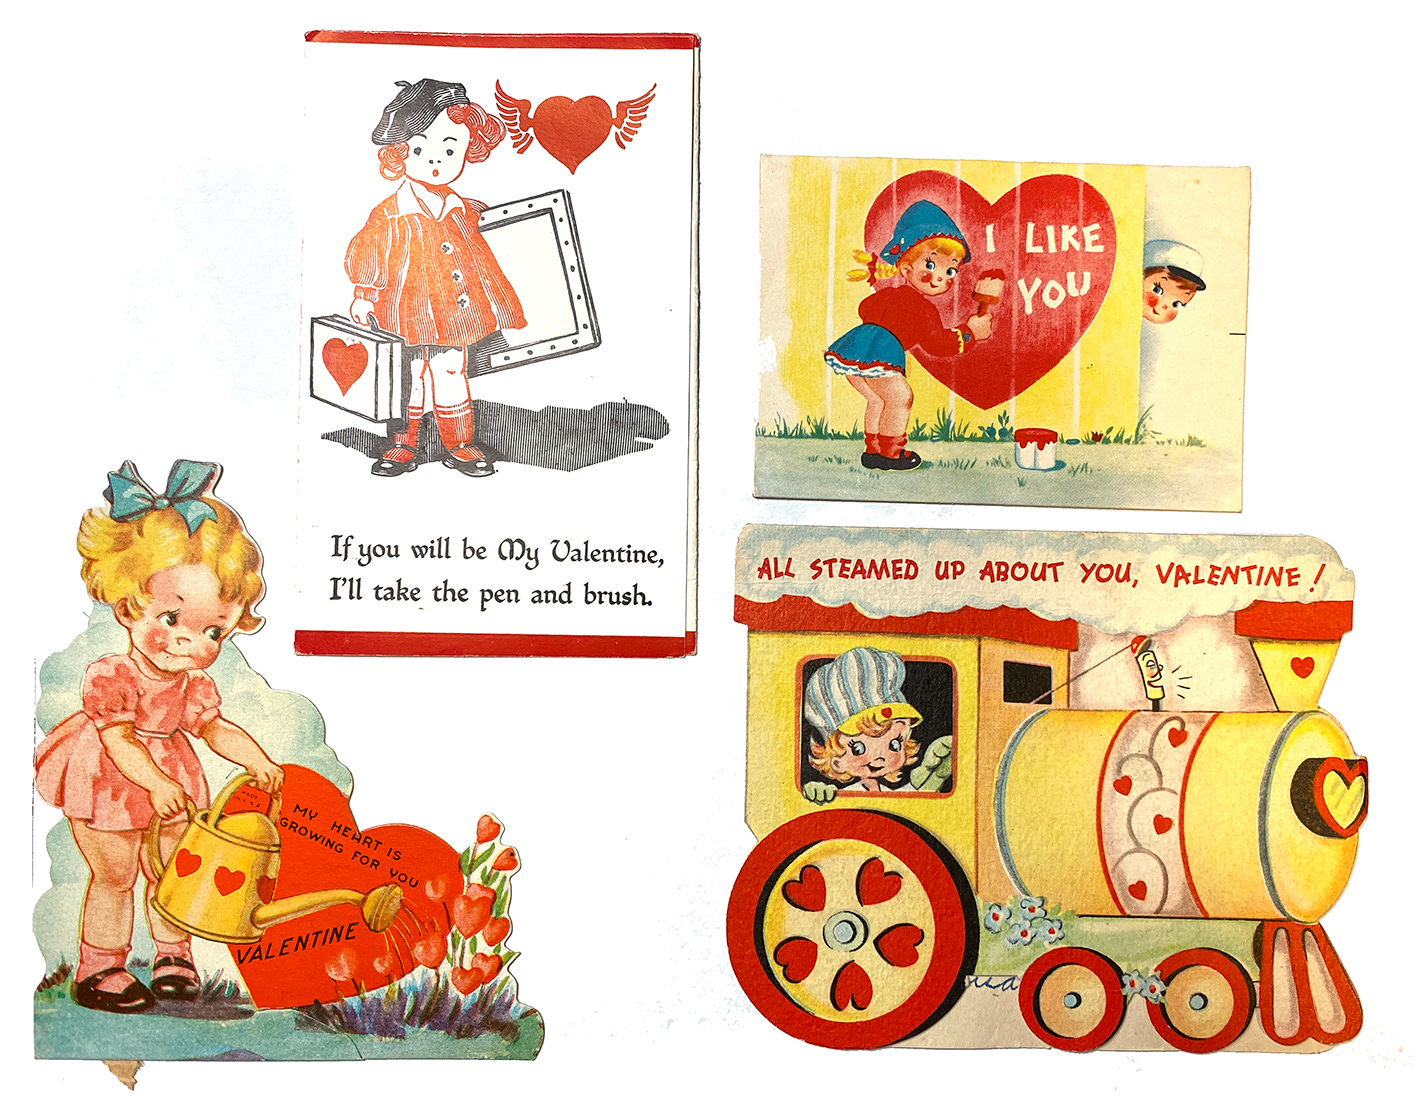 A collection of vintage kitschy valentines.